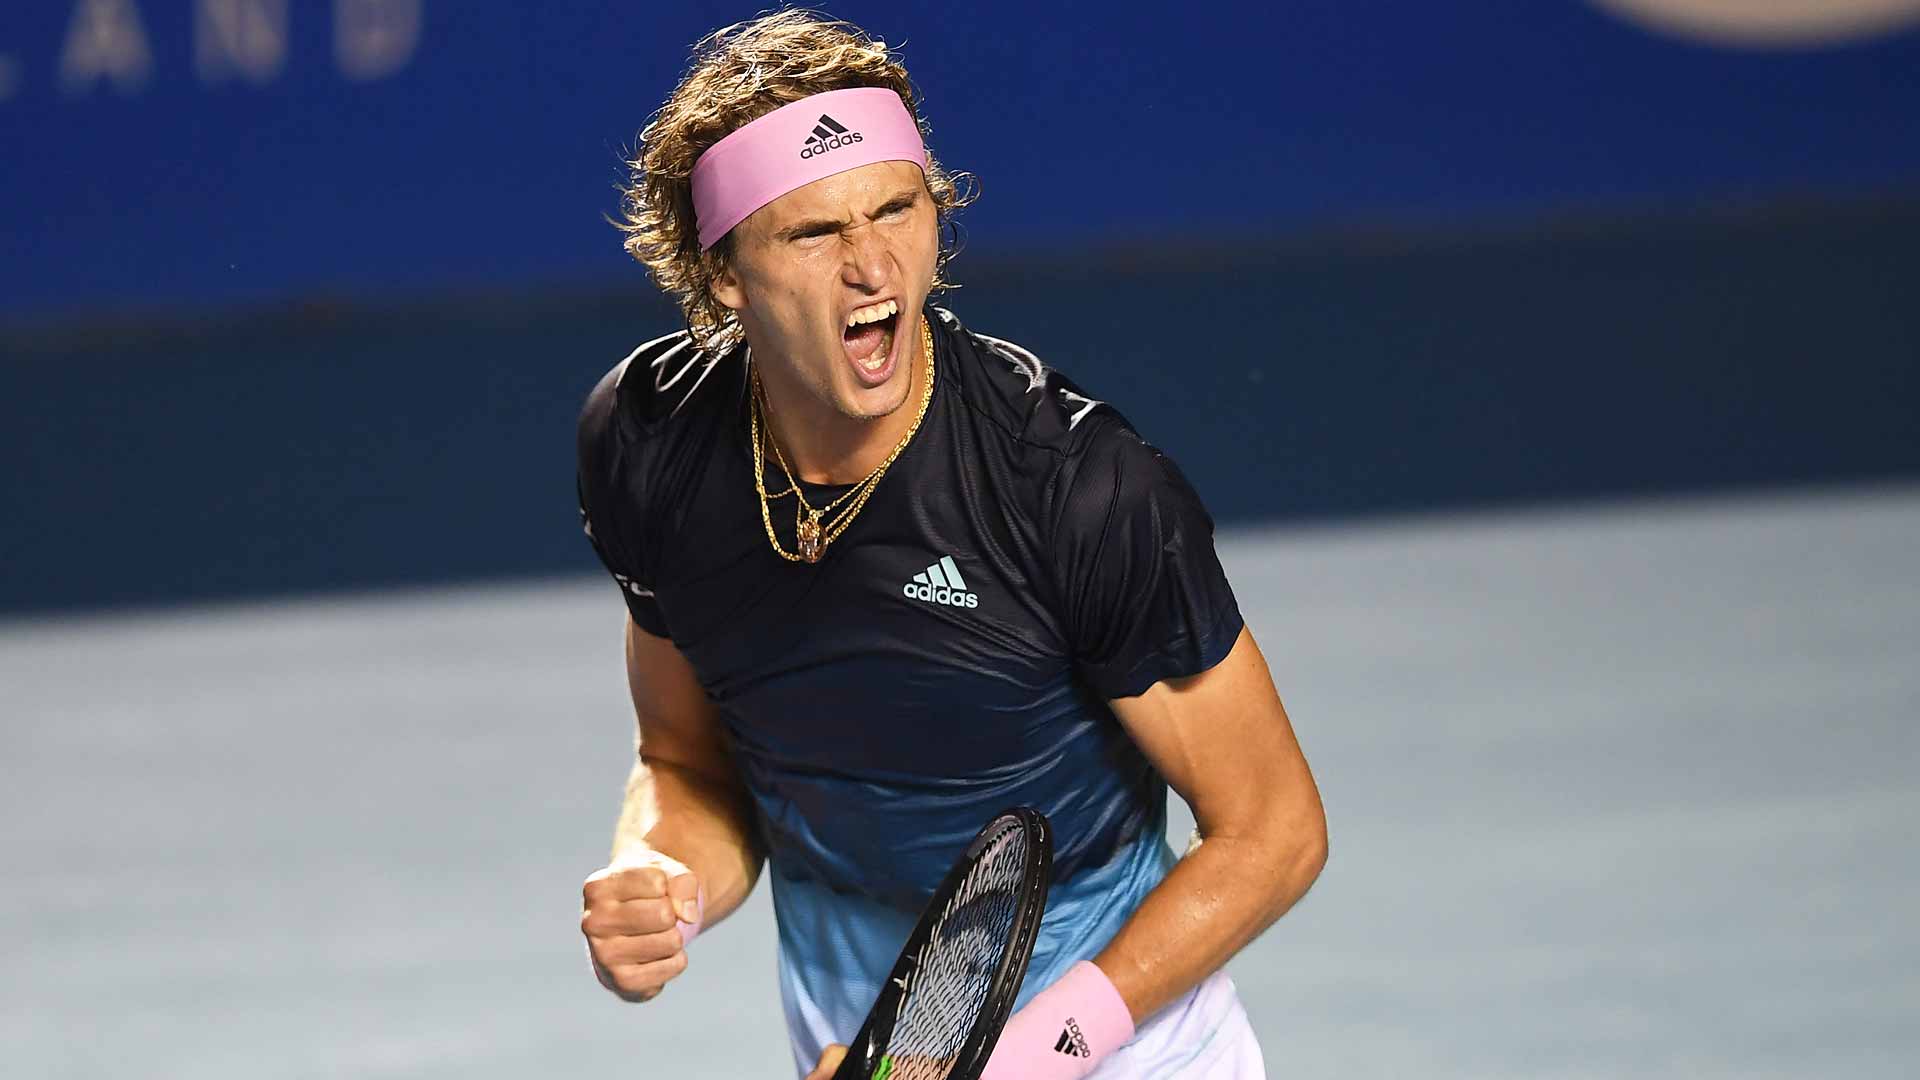 Alexander Zverev Reaches Acapulco Final For The First Time